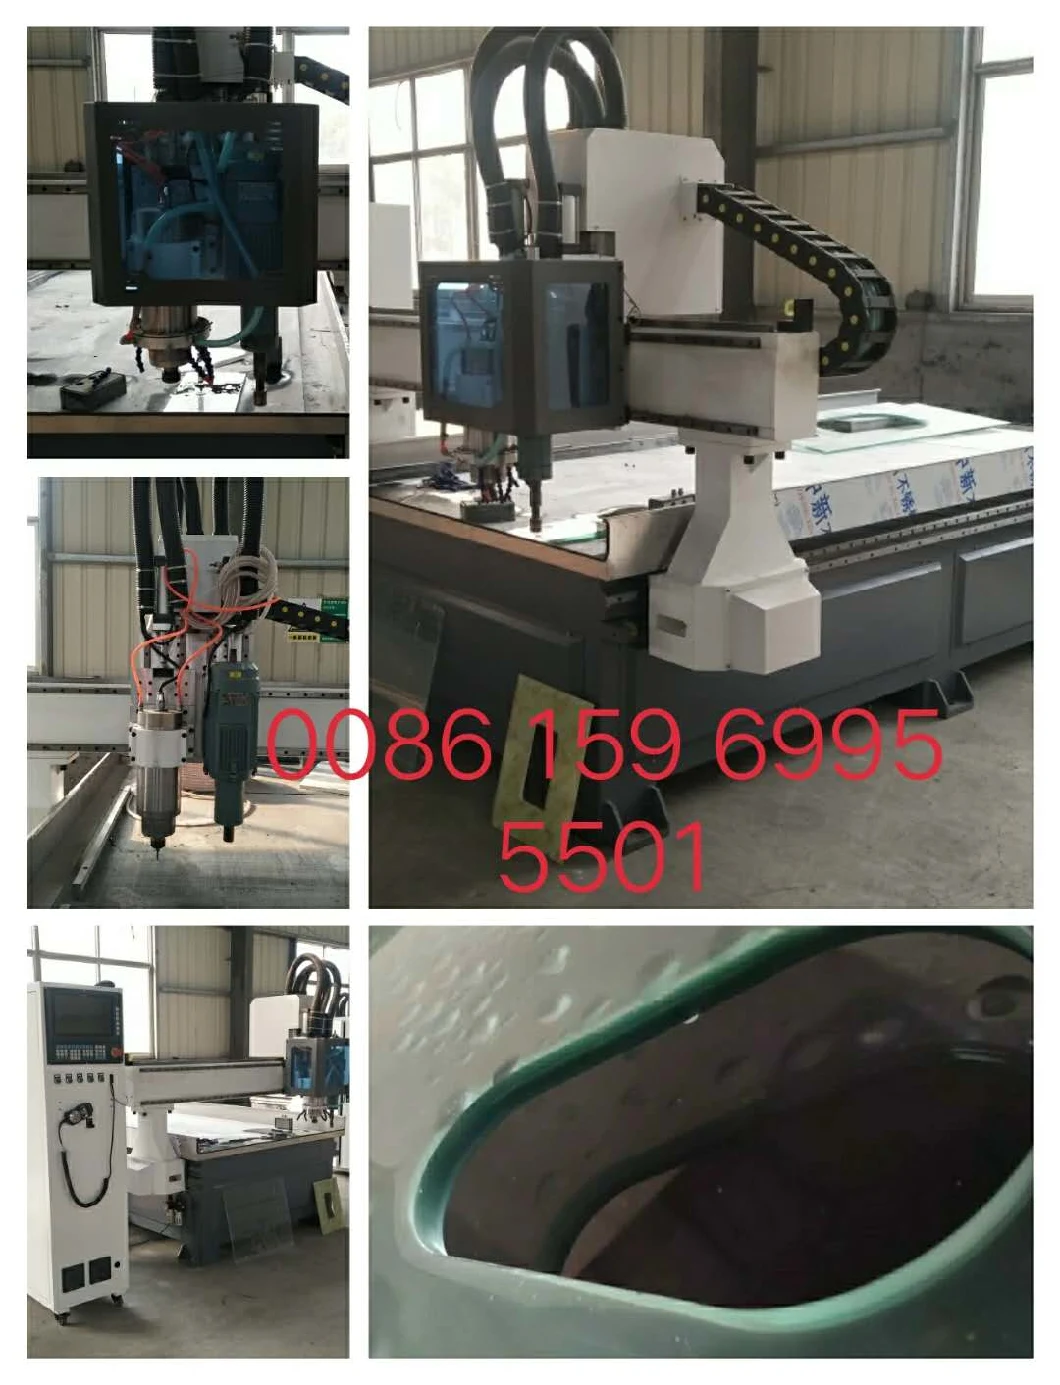 Zxx-C1325 Automatic Glass Processing Machine for Drilling Cutting Notching Grinding